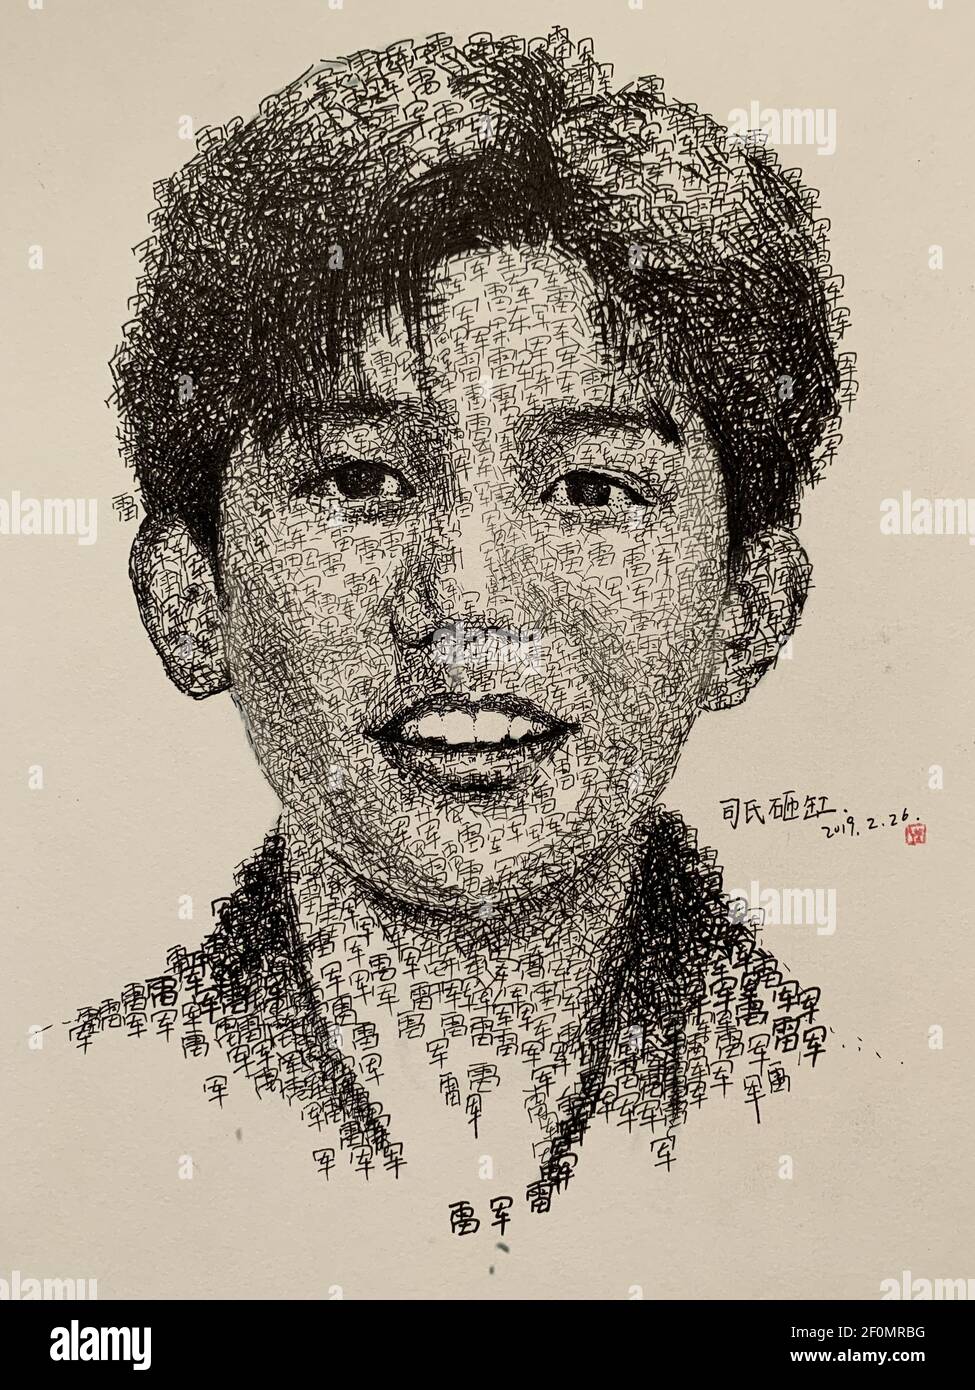 In this undated photo, the portrait of Roy Wang or Wang Yuan of Chinese boy group TFBoys made of Chinese characters of Lei Jun, Chairman and CEO of Xiaomi Technology and Chairman of Kingsoft Corp., created by 30-year-old teacher is displayed in Changchun city, northeast China's Jilin province. 30-year-old Chinese teacher created a new method to paint portraits in Changchun city, northeast China's Jilin province. The portraits made of Chinese characters went viral on the internet. (Photo by Bai shi - Imaginechina/Sipa USA) Stock Photo